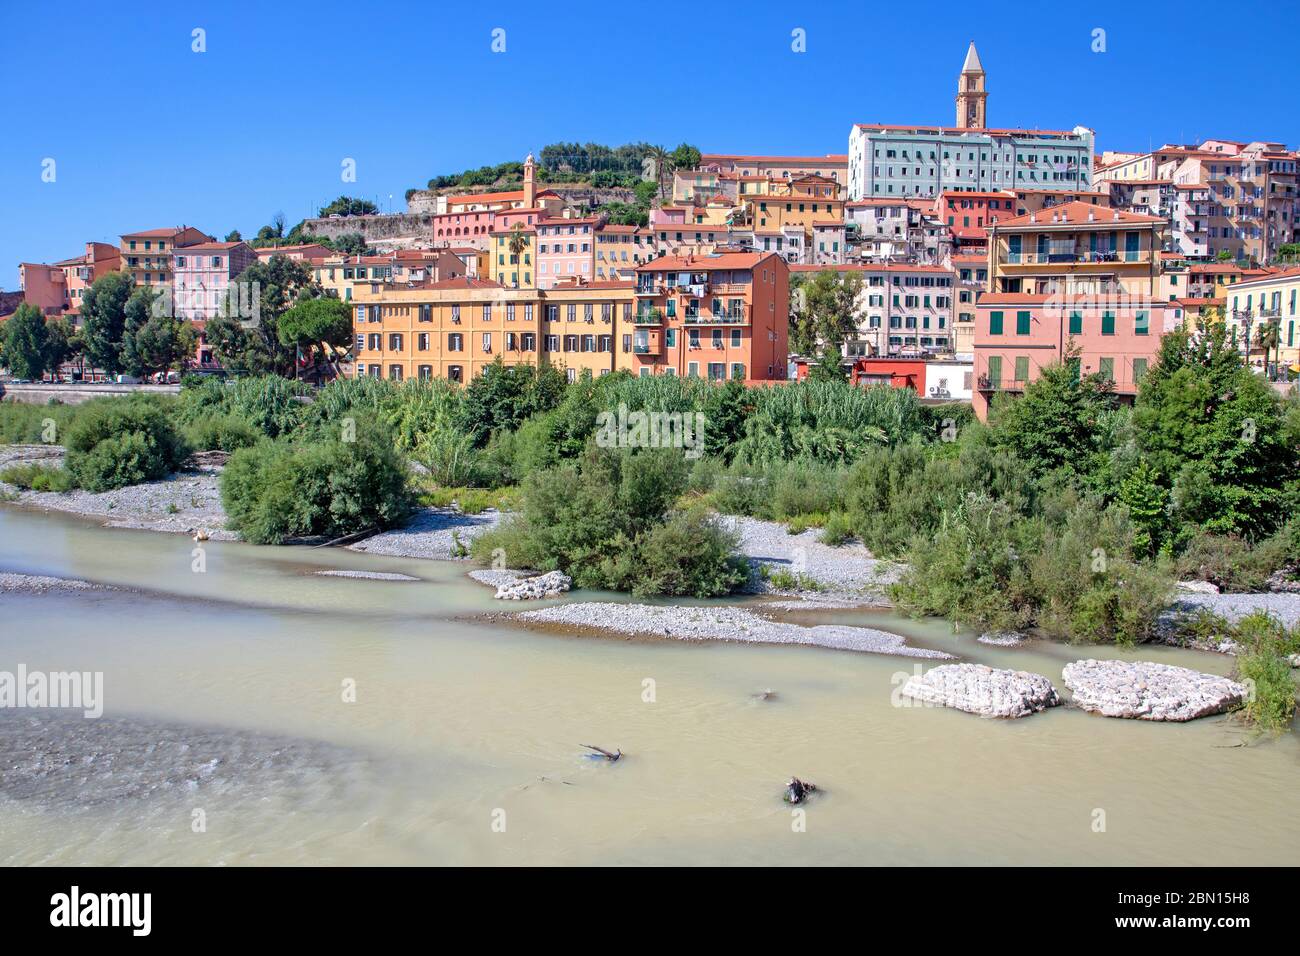 The old town of Ventimiglia Stock Photo